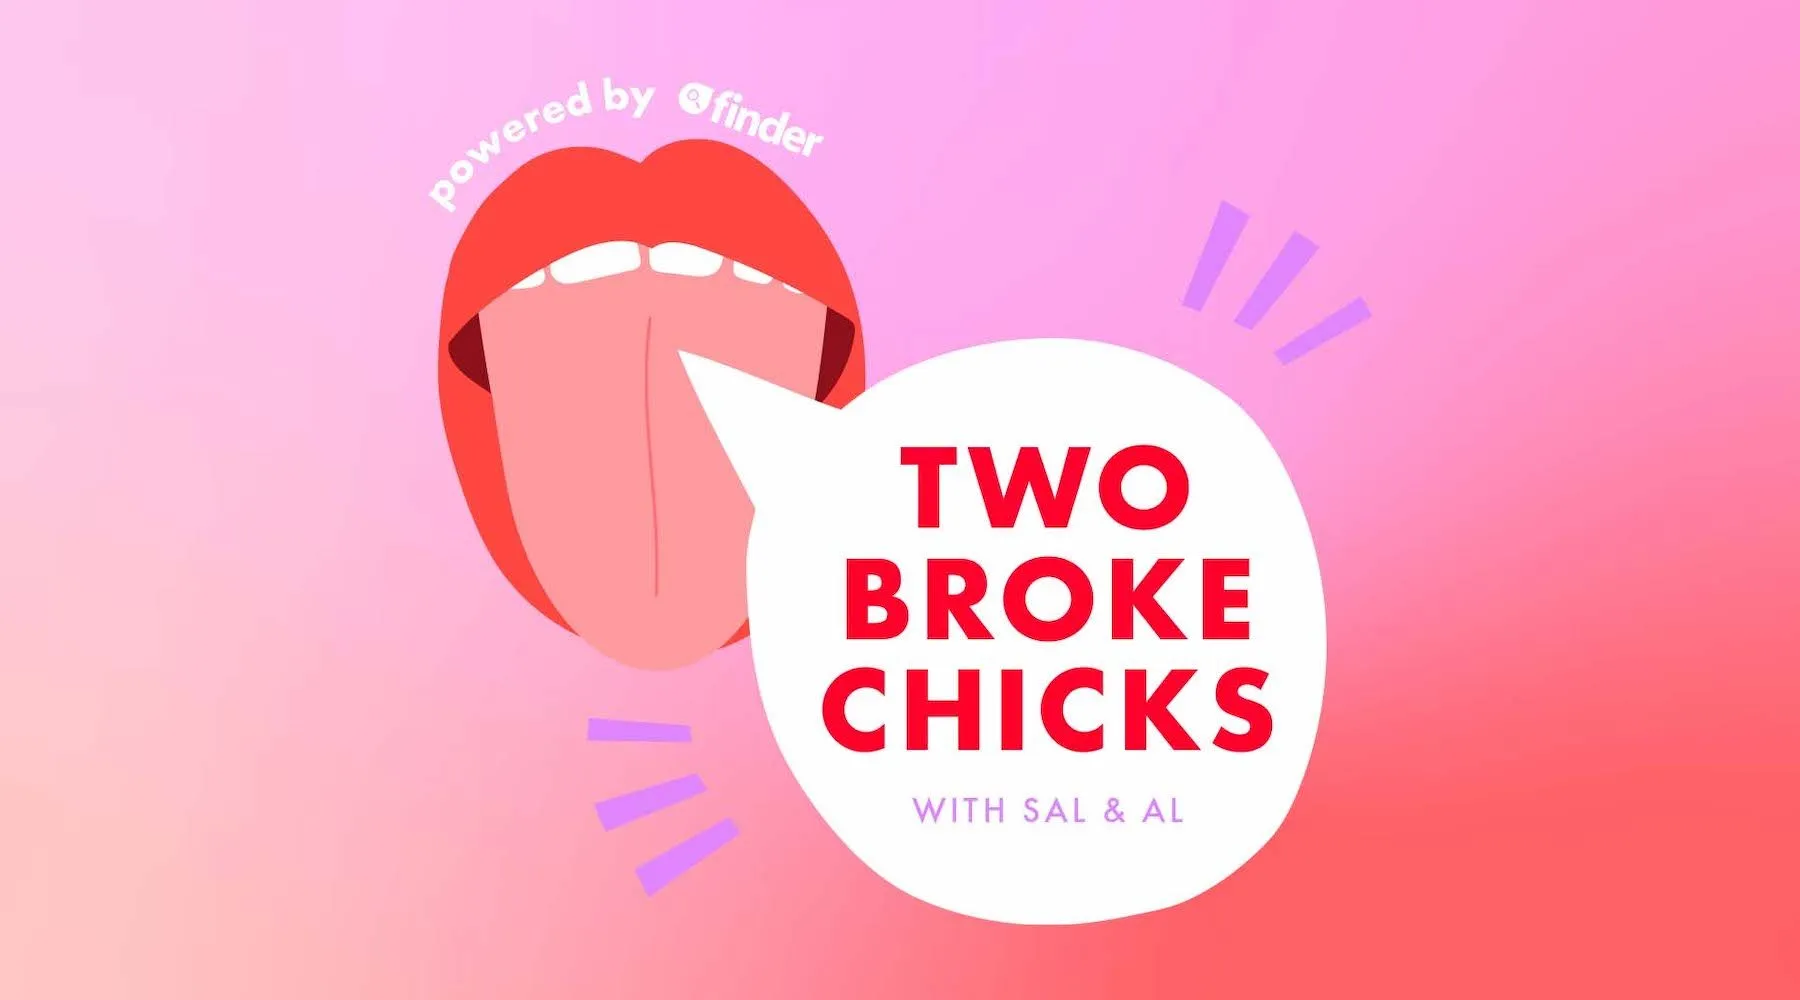 finder-launches-season-2-of-two-broke-chicks-podcast-with-nova